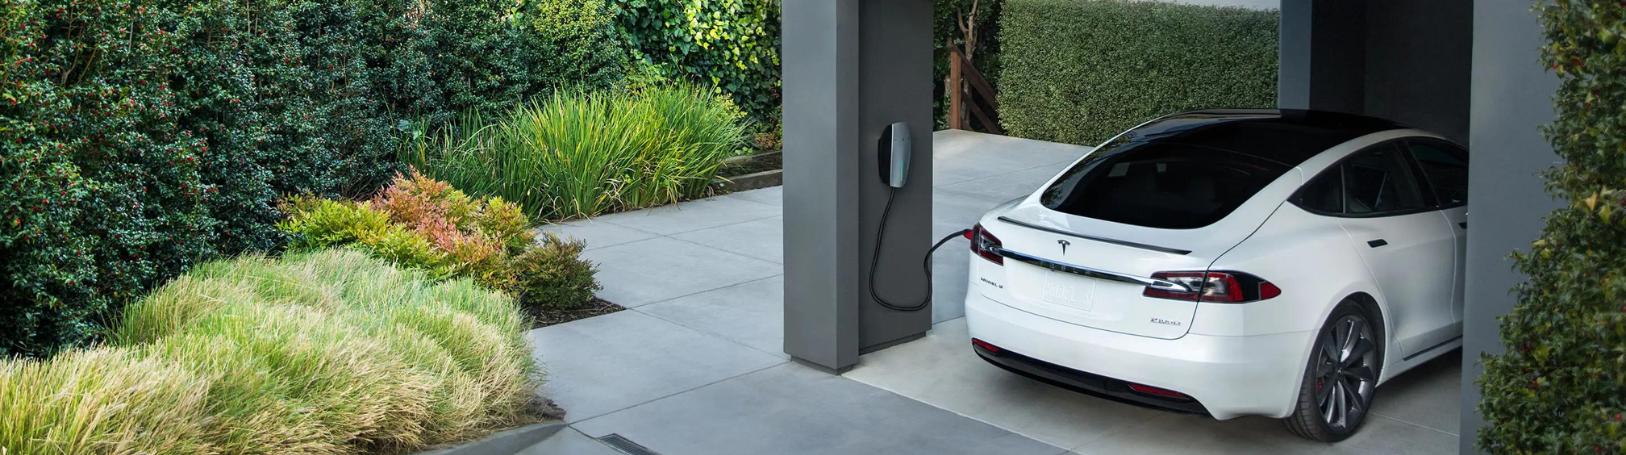 Tesla EV In Garage Being Charged With Tesla Charger